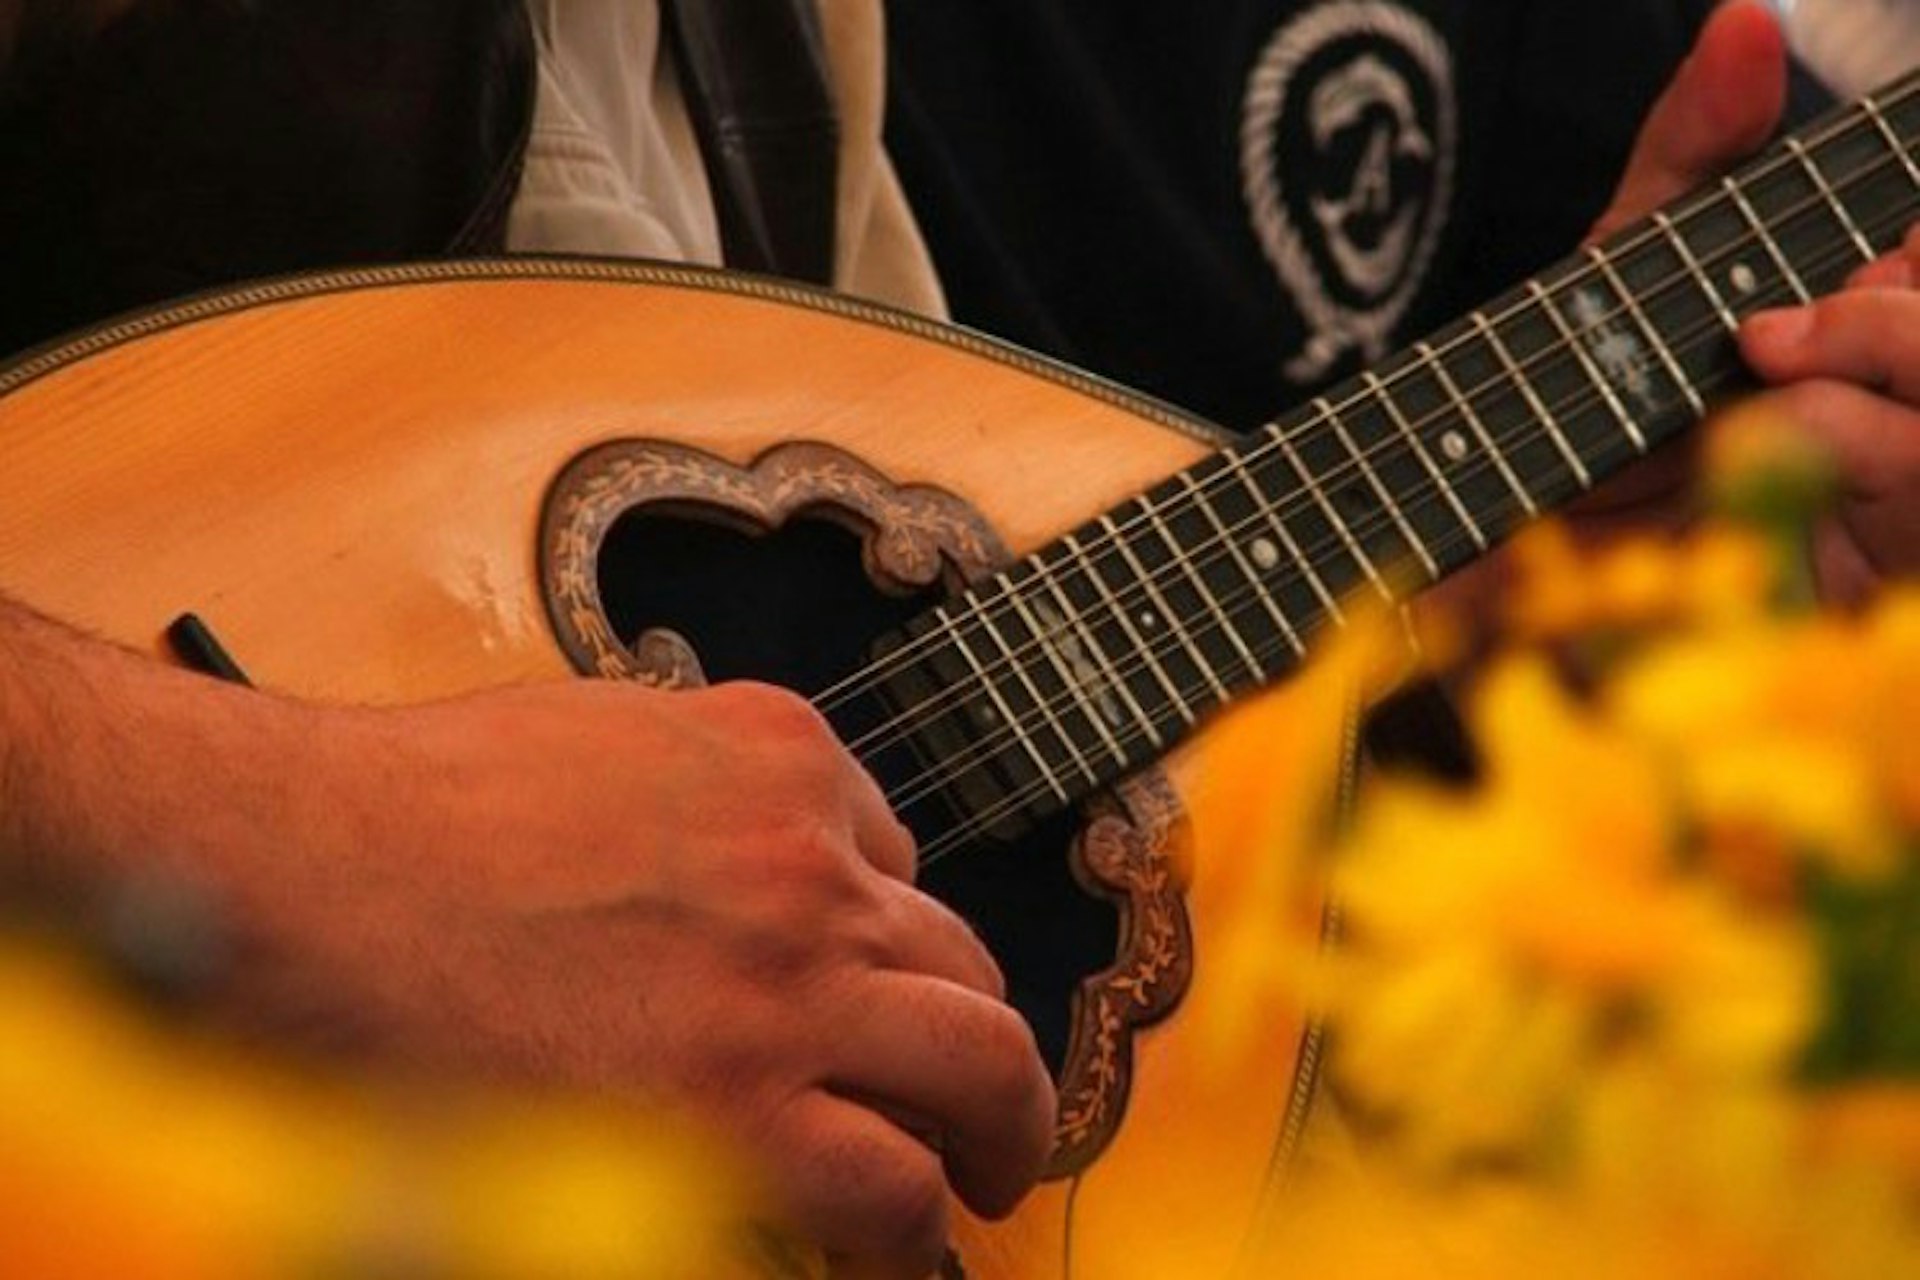 A close-up shot of a person playing a stringed instrument called a bouzouki